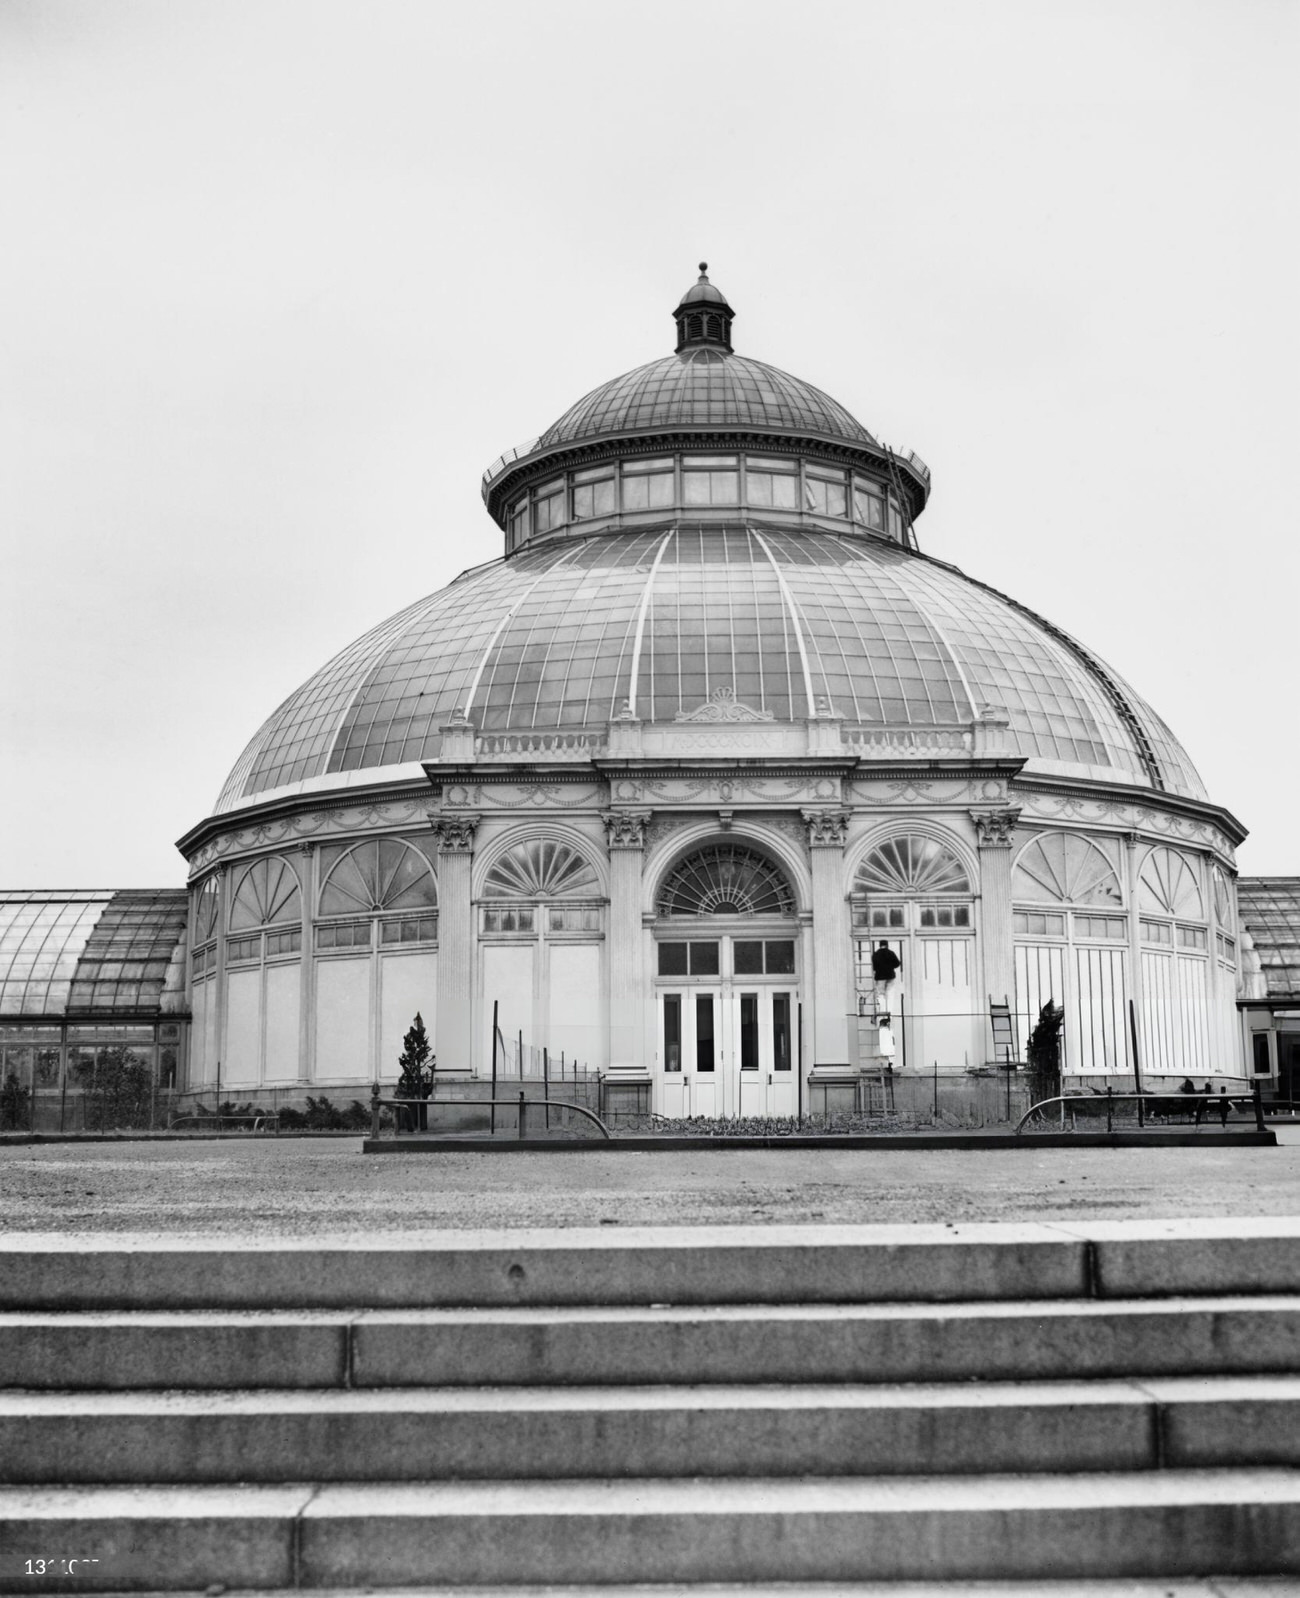 The Conservatory At The New York Botanical Garden In Bronx Park, Renamed The Enid A Haupt Conservatory, Circa 1946.